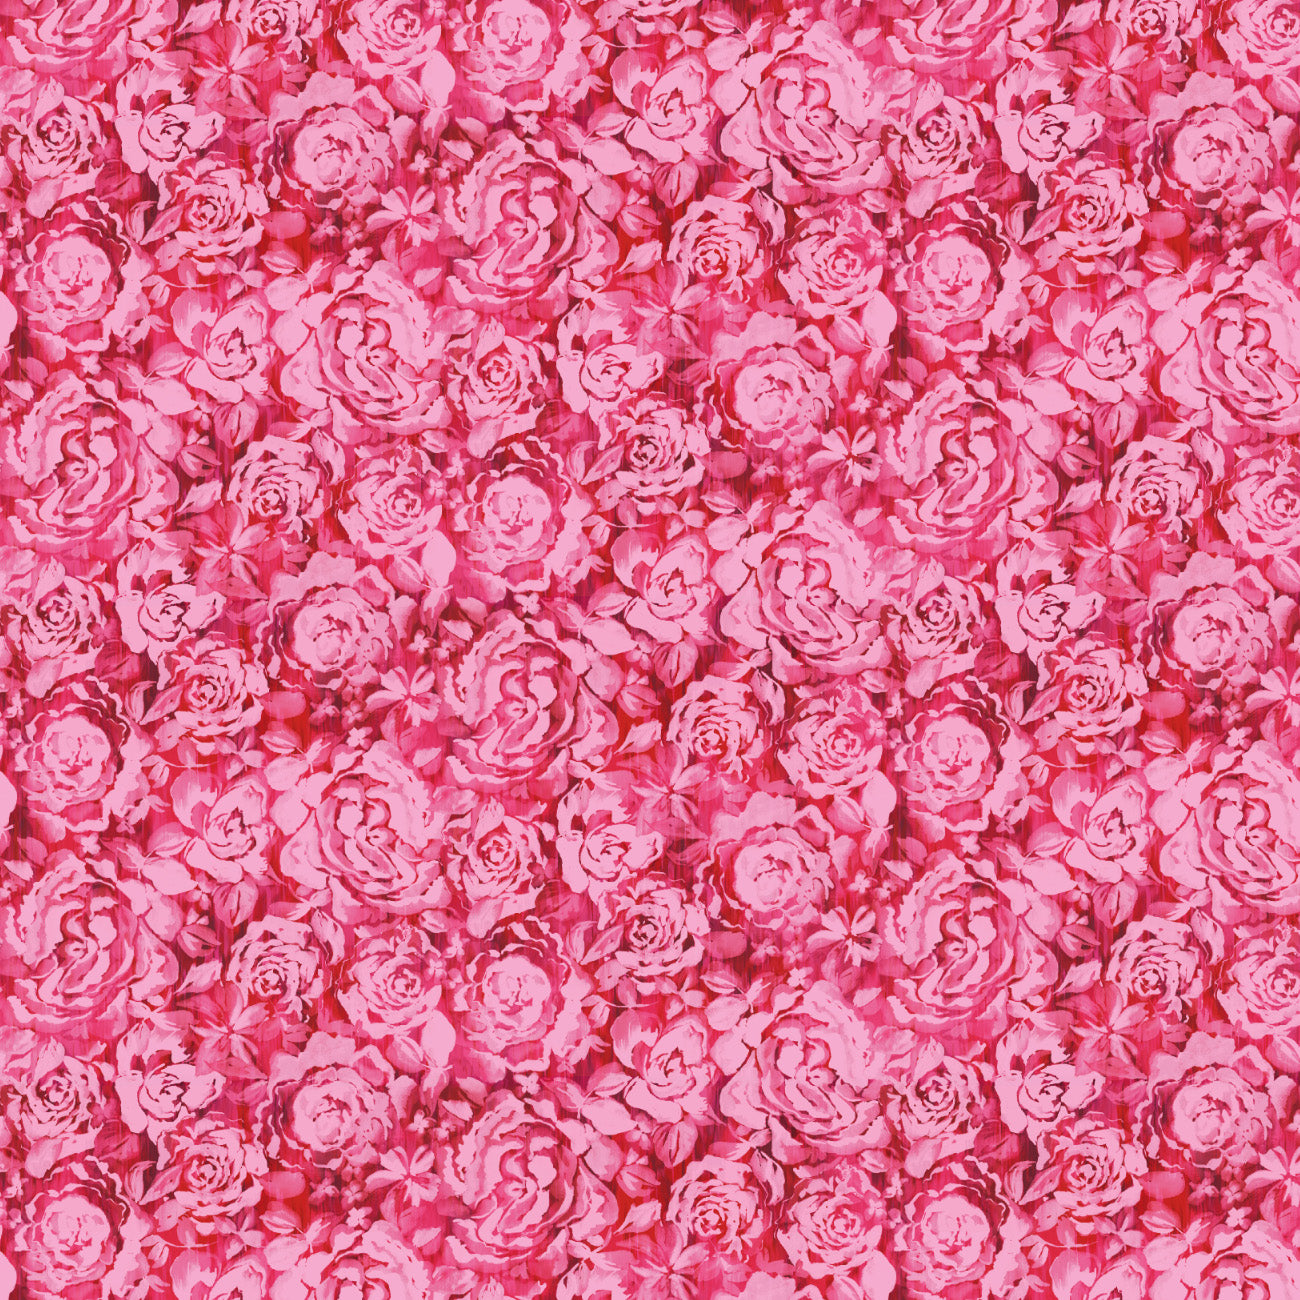 Daphne Collection-Textured Roses-Pink-100% Cotton 21231303-01